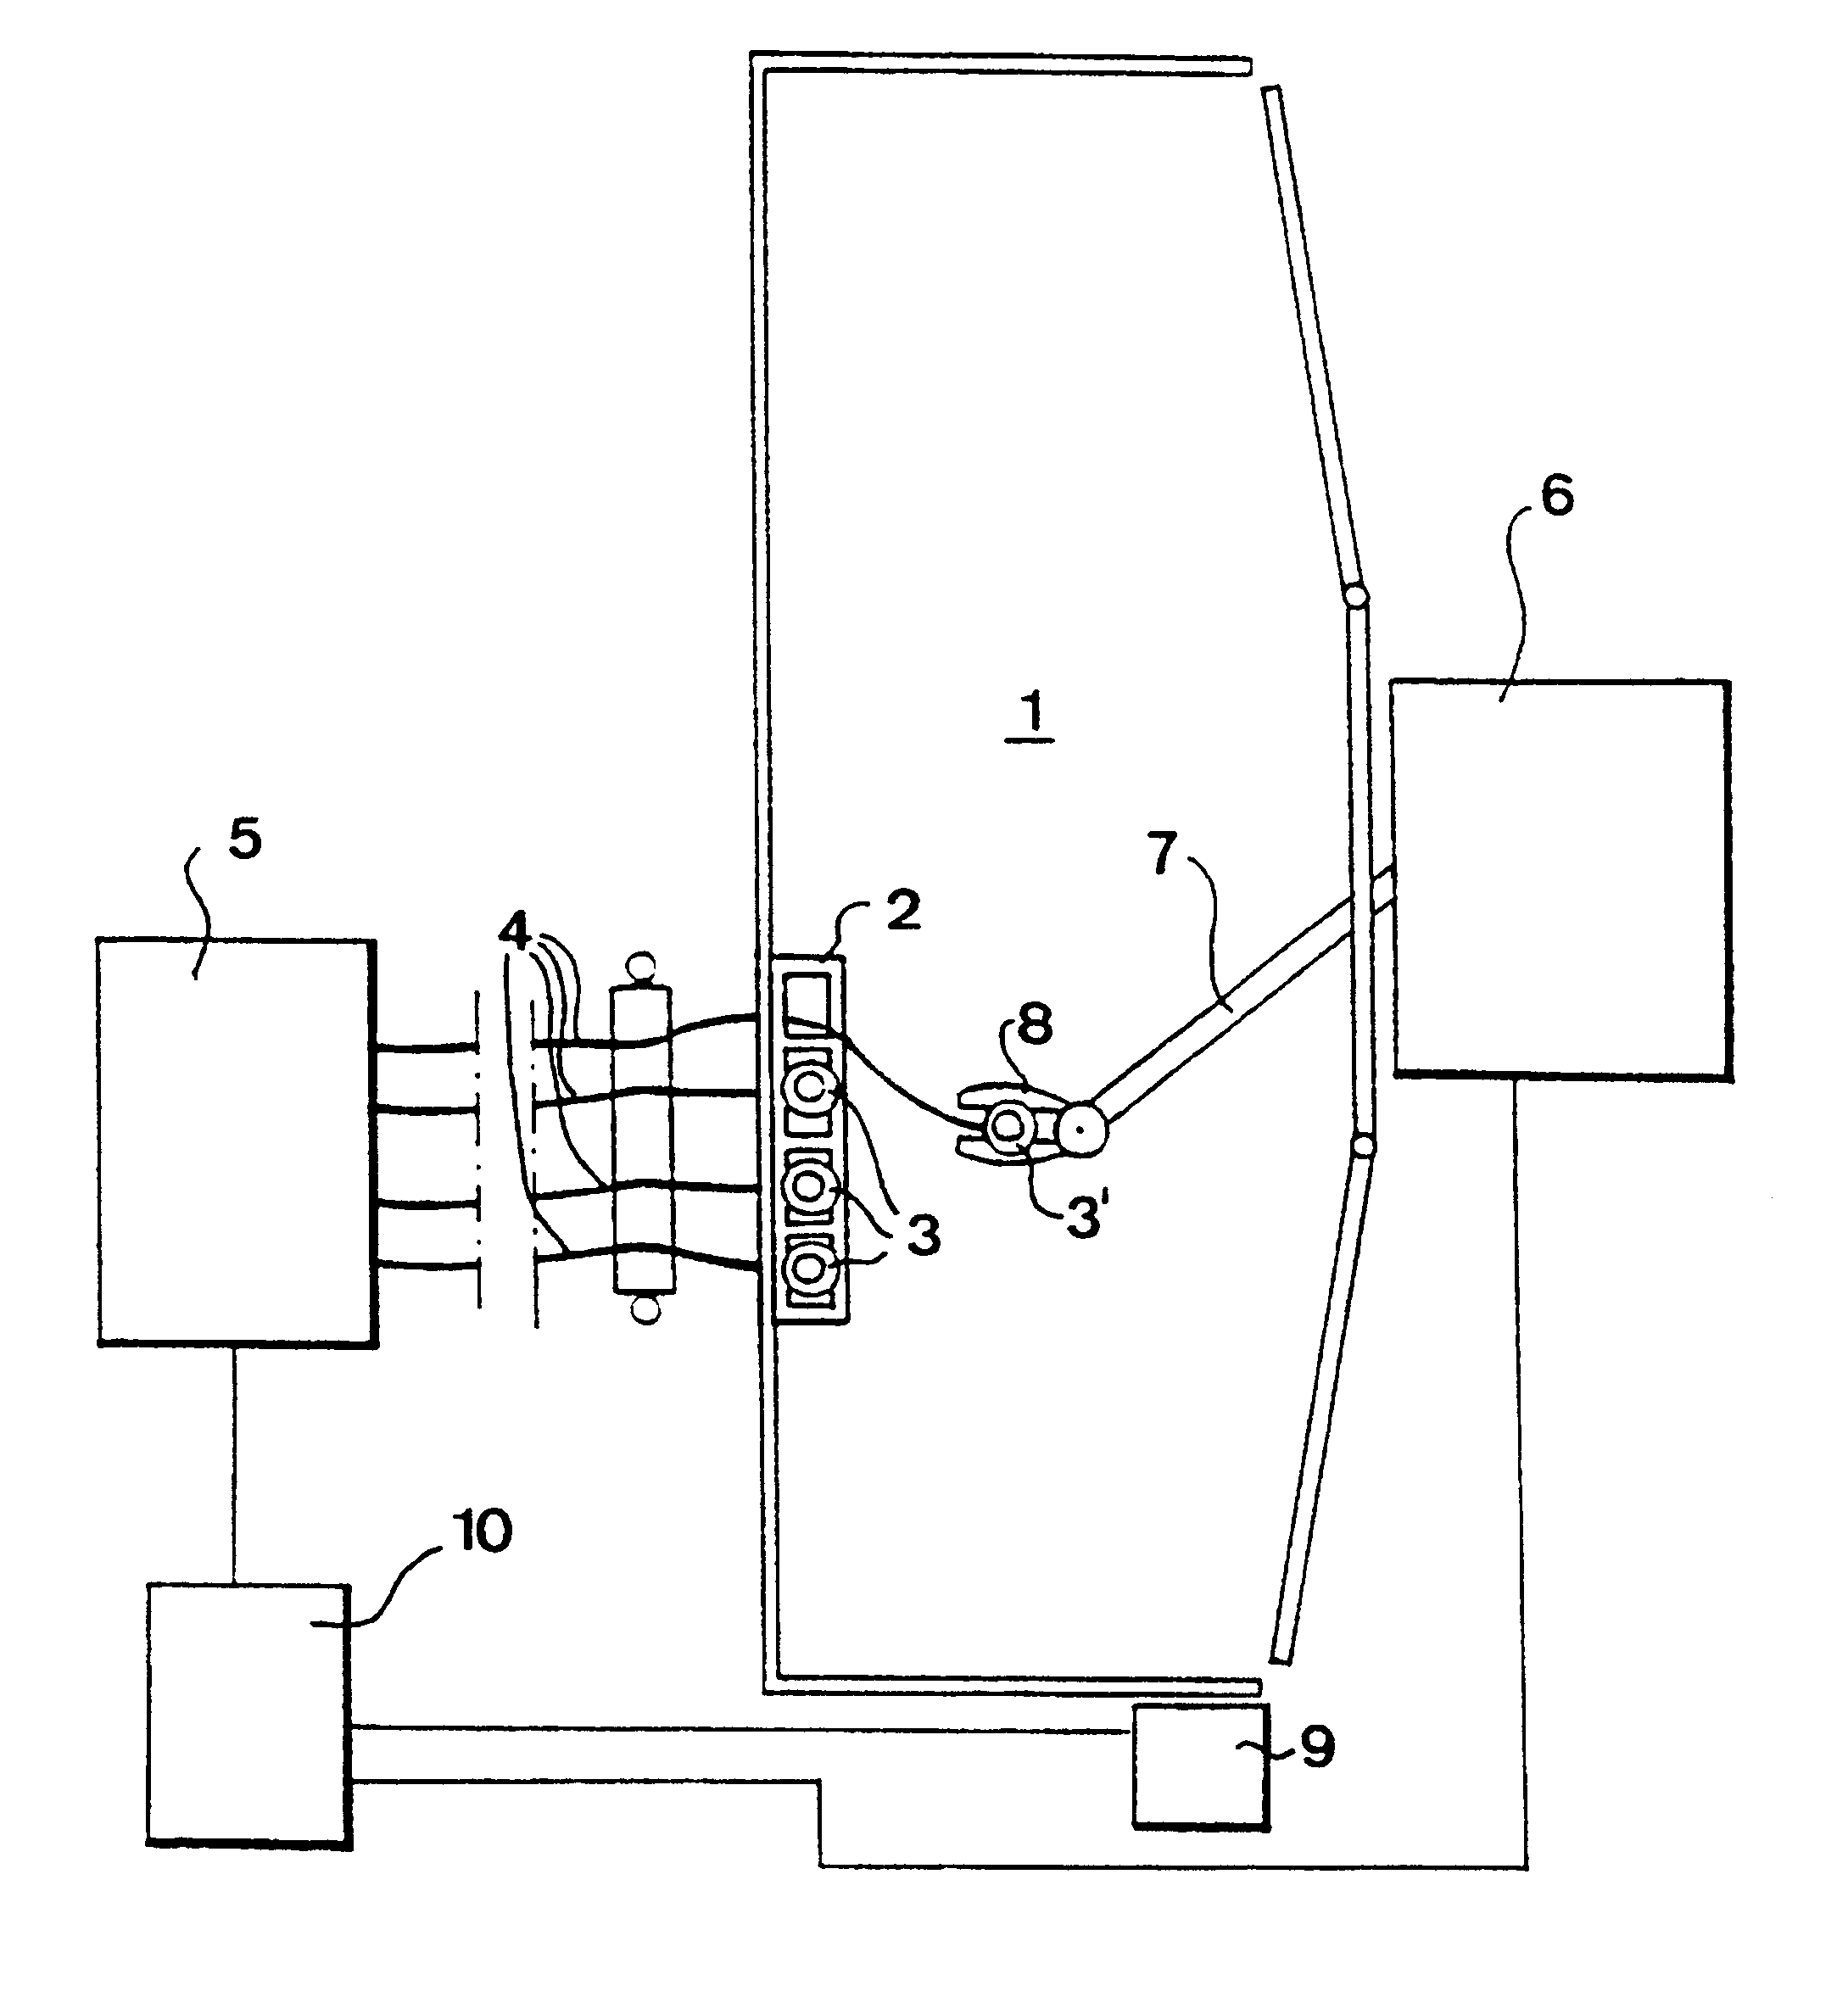 Method of and a device for milking an animal